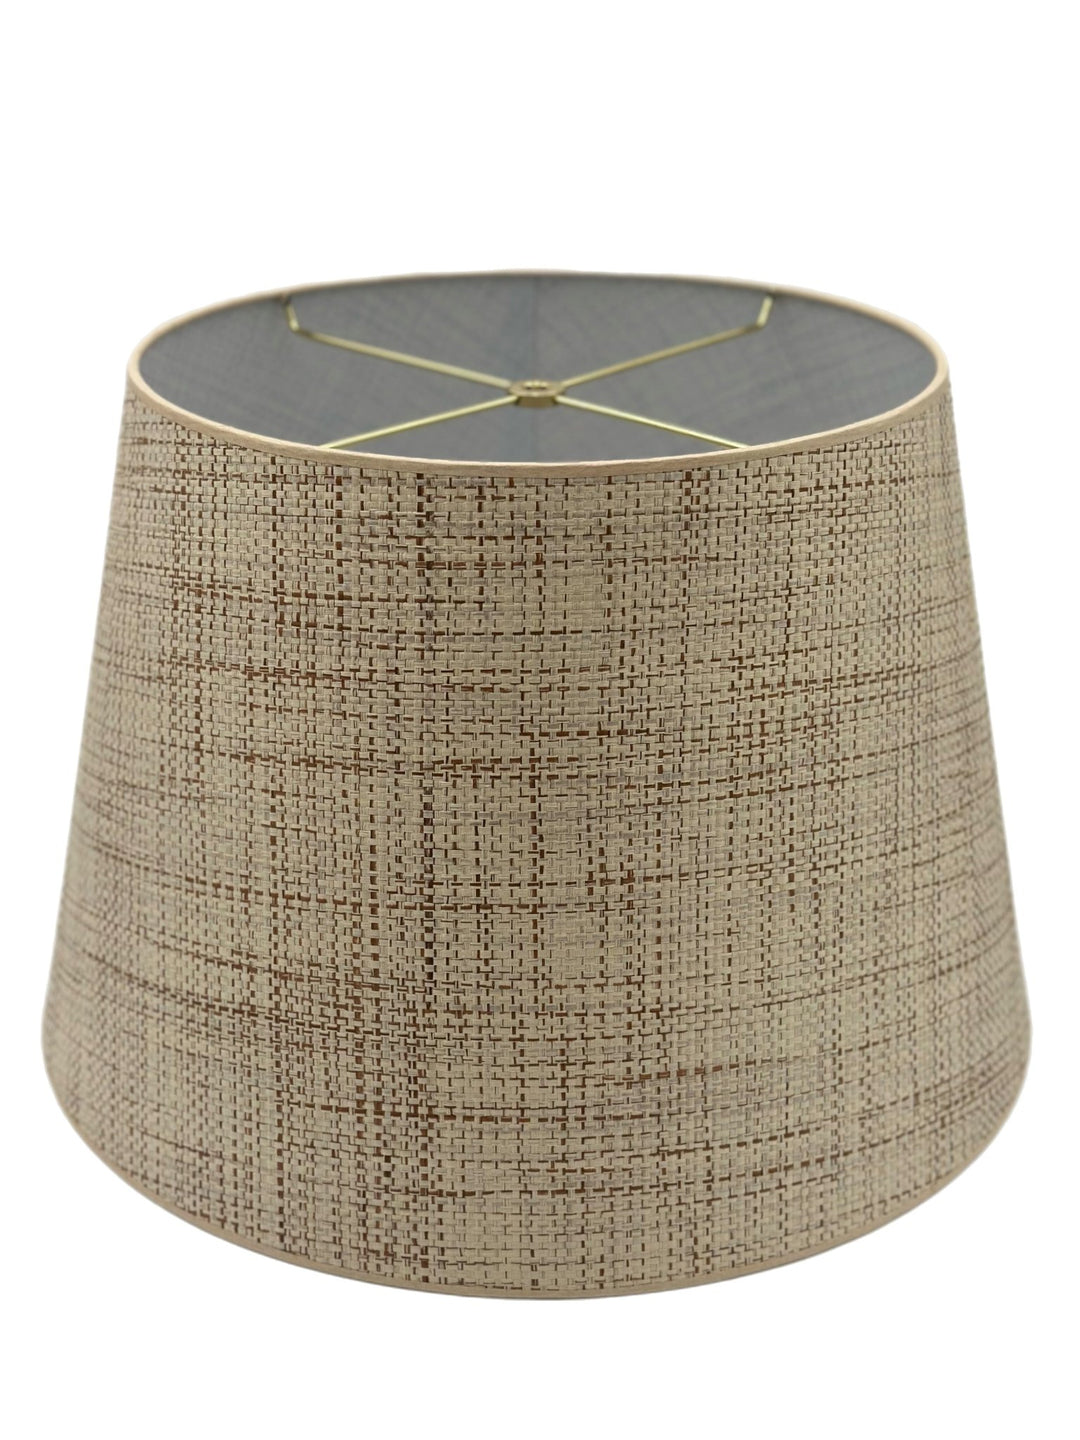 Pembroke Style Raffia Shades - Multiple Sizes / Made to order - Lux Lamp Shades